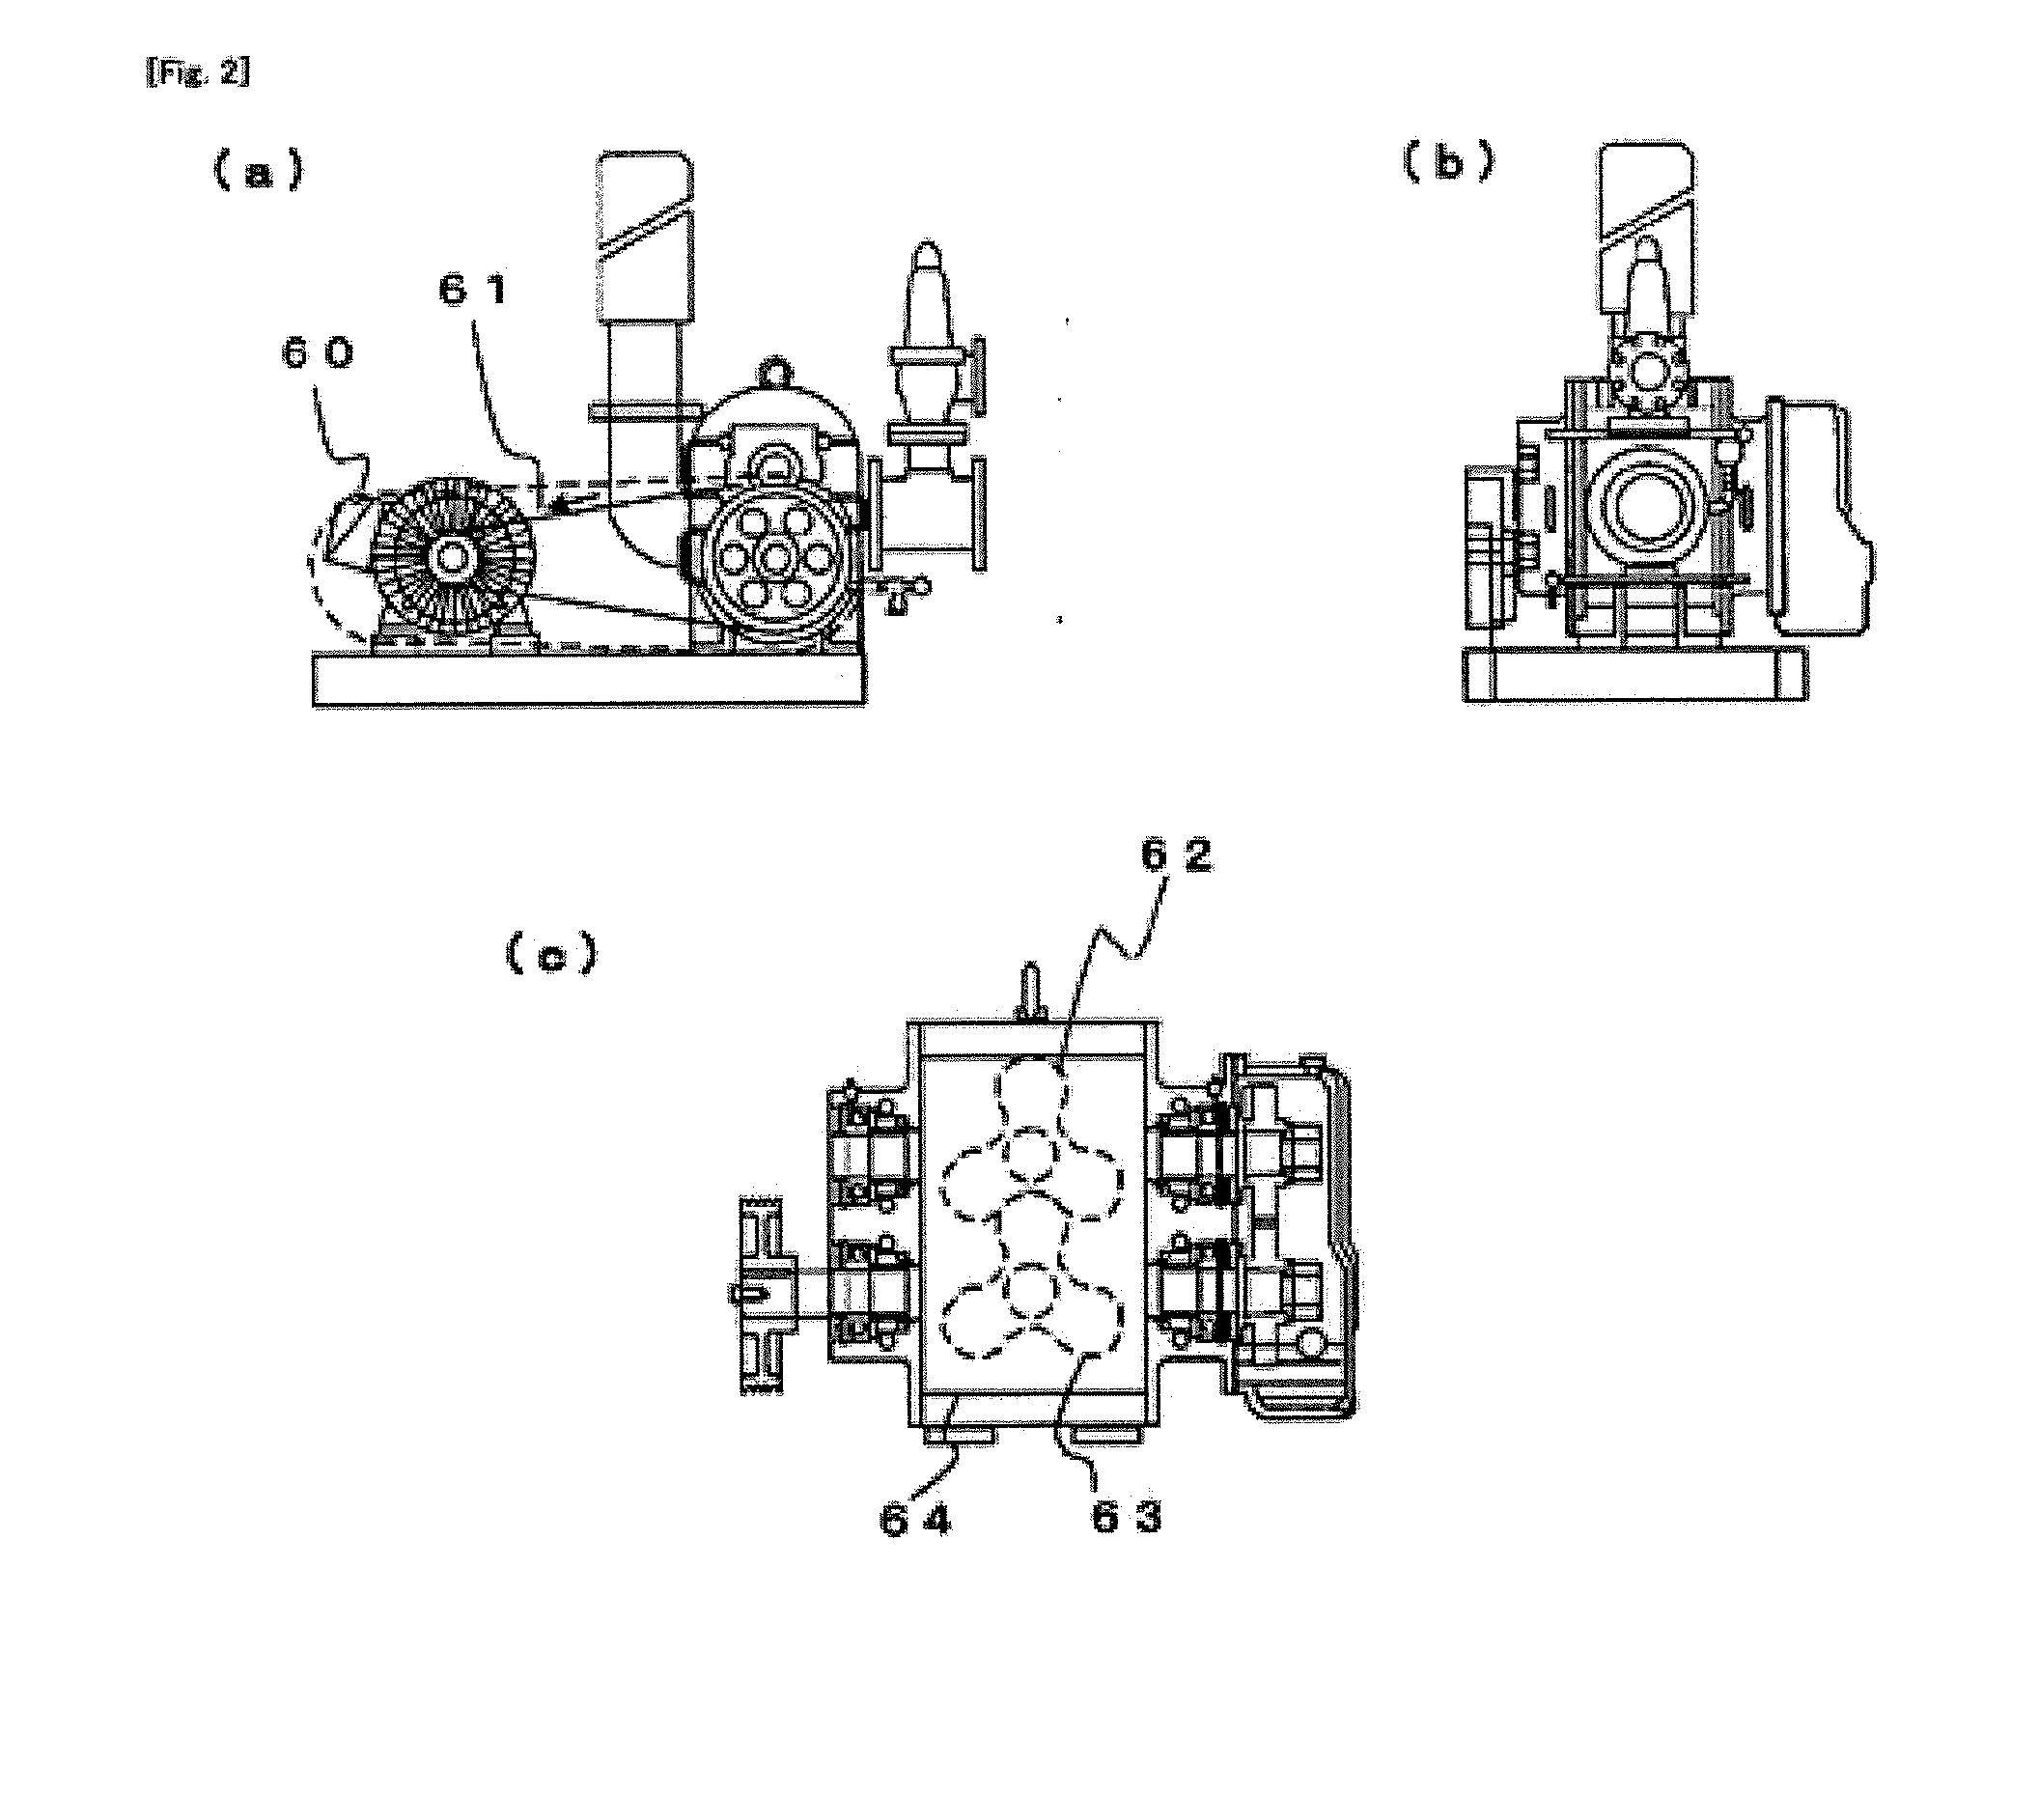 Frictional resistance reduction device for ship